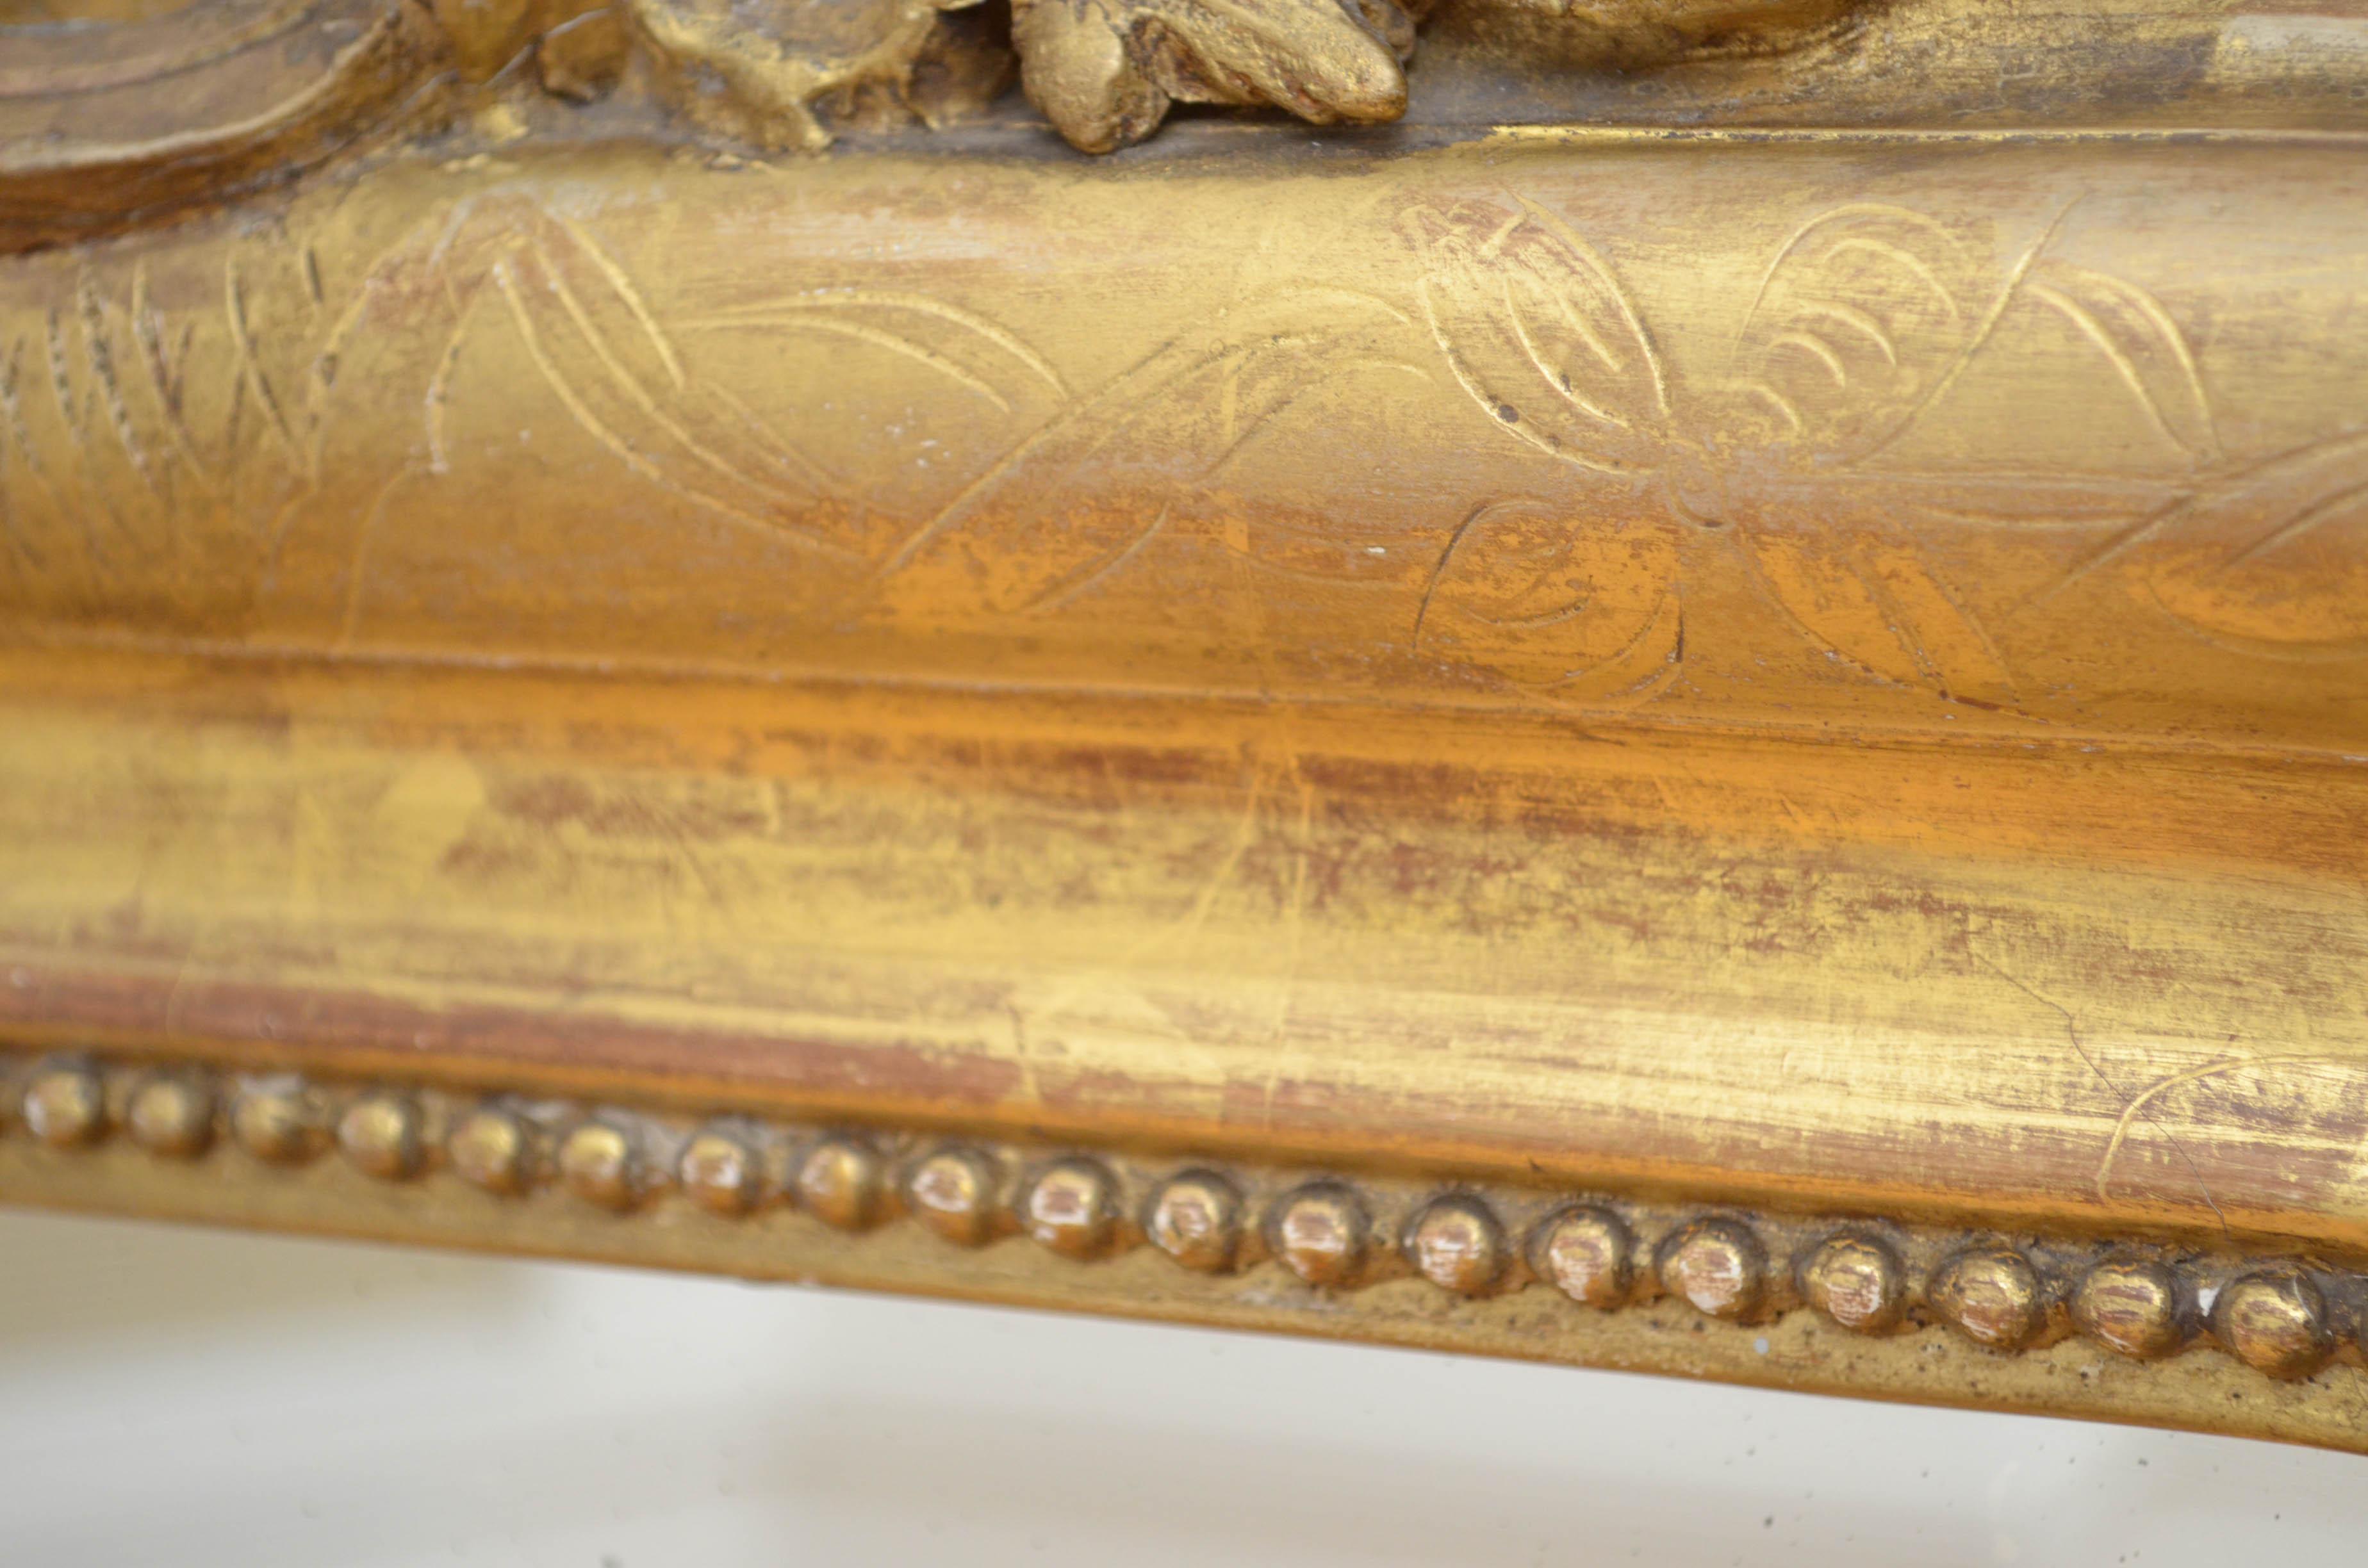 19th Century French Giltwood Mirror 6